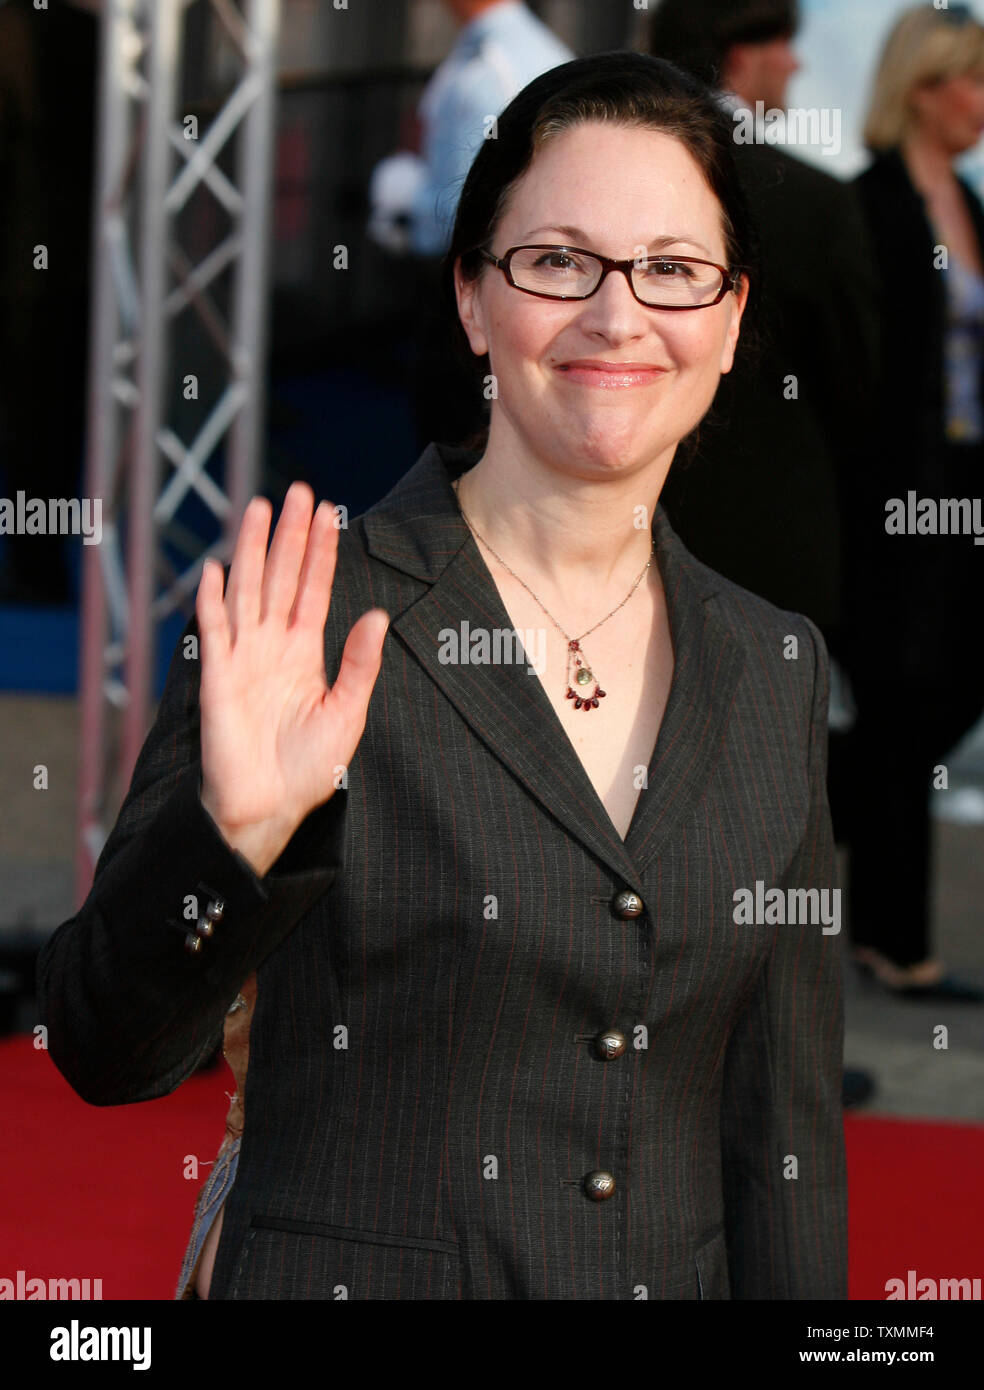 Director Karen Moncrieff arrives on the red carpet at the closing ceremony of the 33rd American Film Festival of Deauville in Deauville, France on September 9, 2007.  Moncrieff's film 'The Dead Girl' was later awarded the Grand Prize award for the best film of the festival.   (UPI Photo/David Silpa) Stock Photo